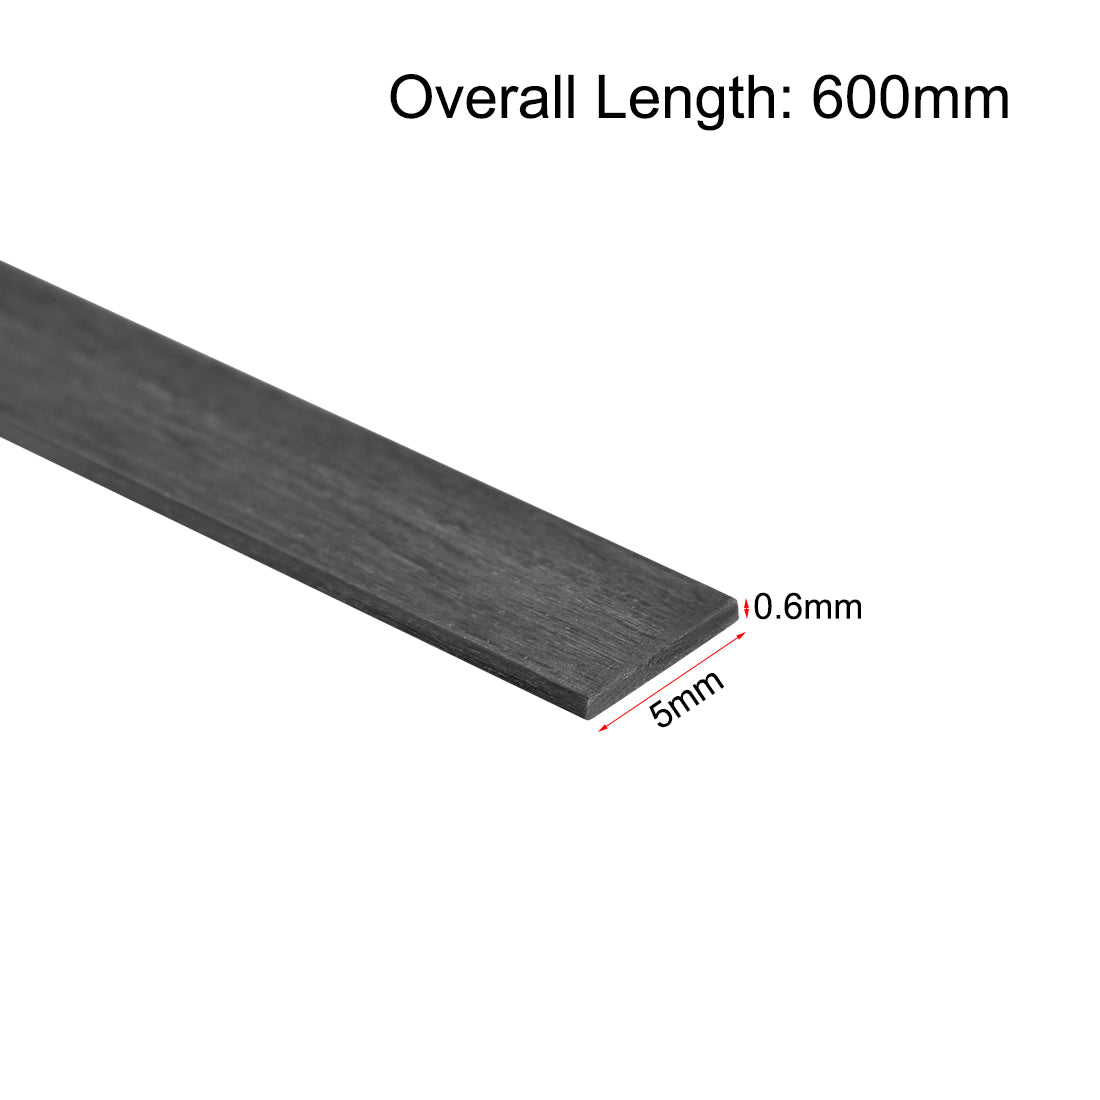 uxcell Uxcell Carbon Fiber Strip Bars 0.6x5mm 600mm Length Pultruded Carbon Fiber Strips for Kites, RC Airplane 2 Pcs